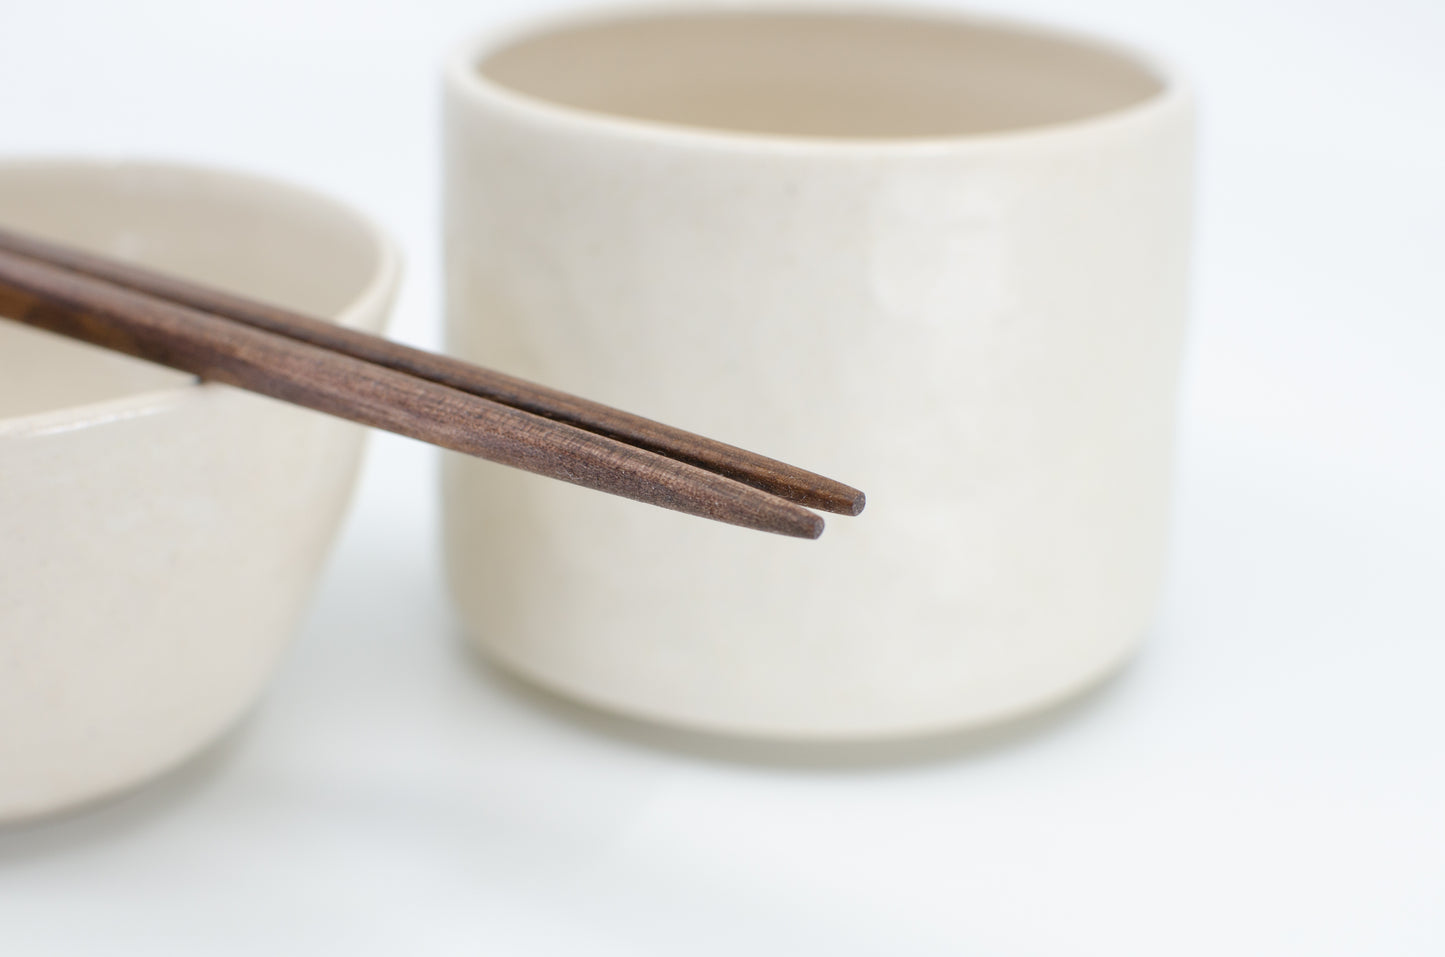 Simpo Square-Pointy style (100% Tung oil finish)-Natural Wood Chopsticks-Made in Canada - Walnut